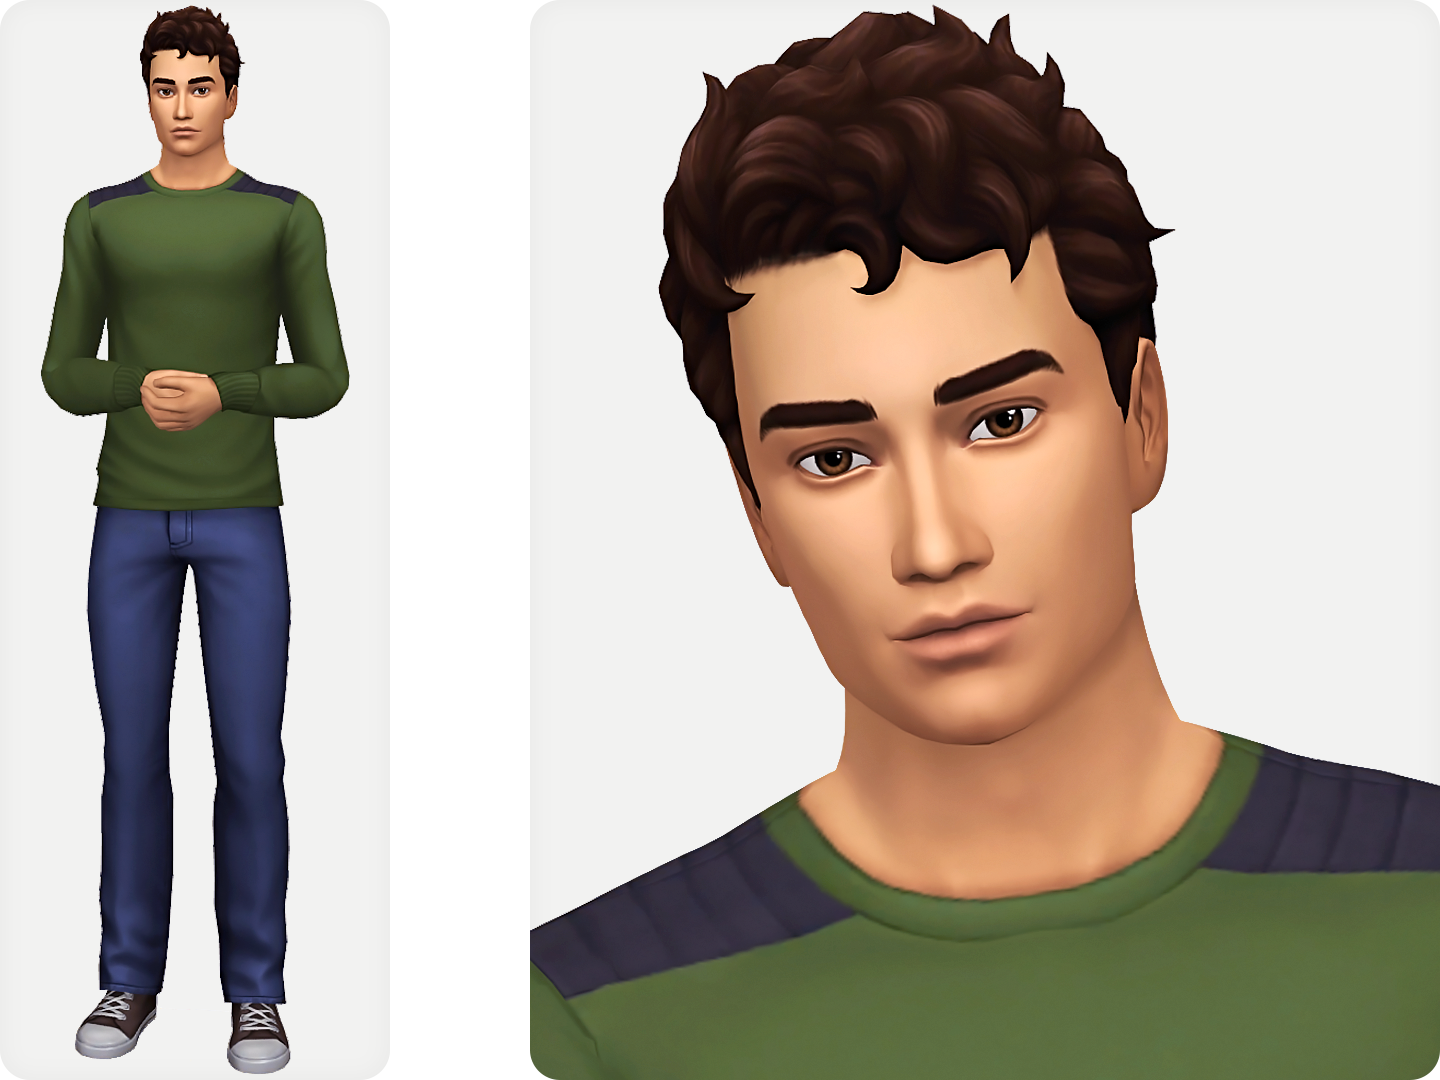 The sims 4 male sims download - honkiosk